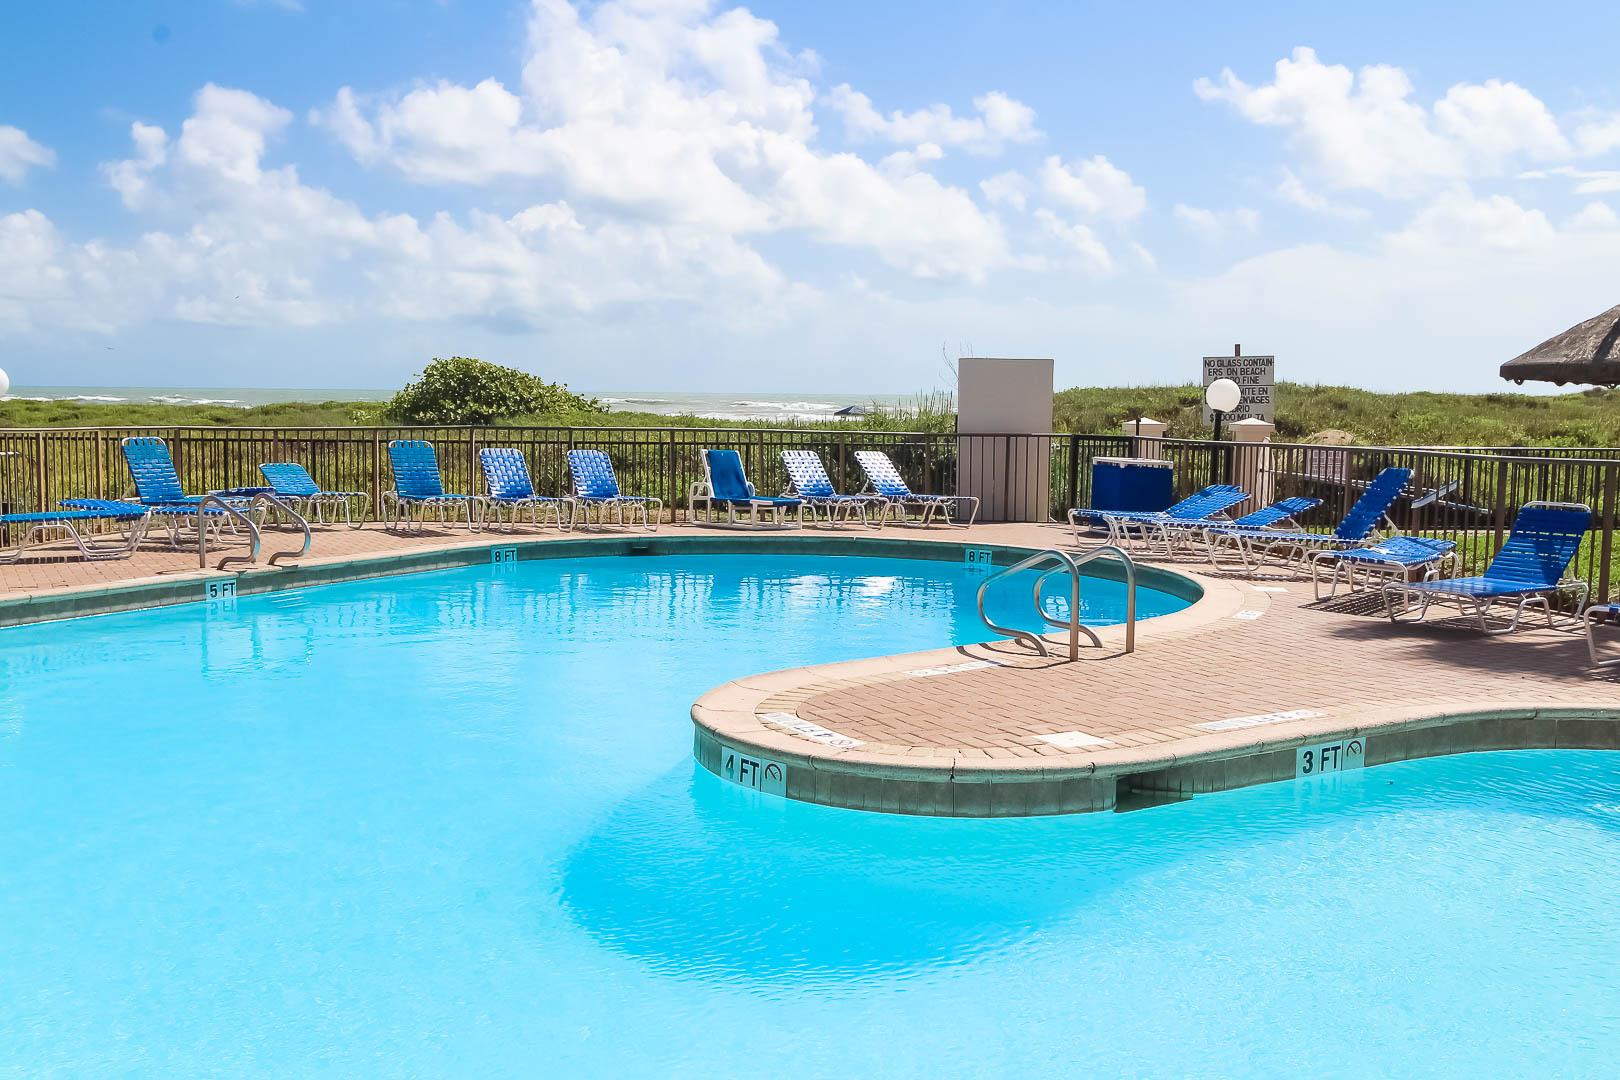 A refreshing beachfront outdoor swimming pool at VRI's Royale Beach and Tennis Club.